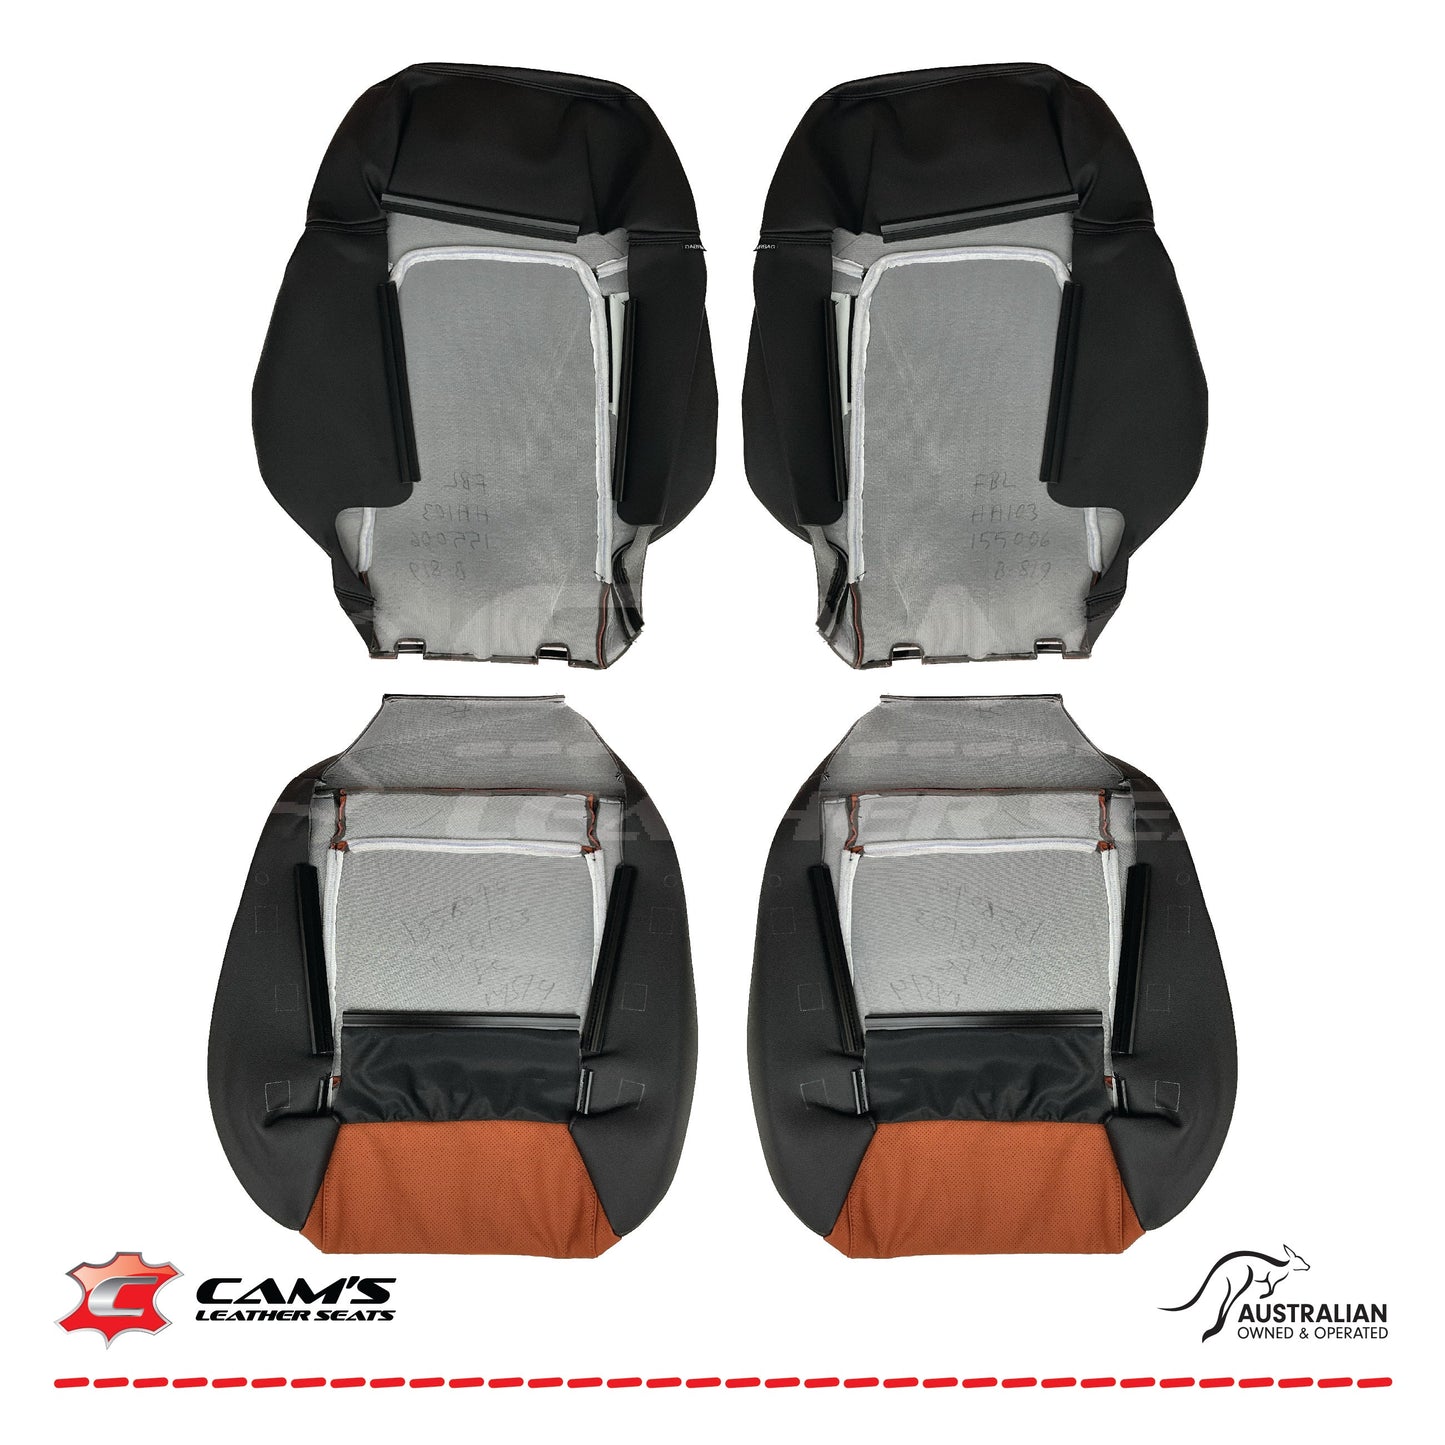 LEATHER SEATS TRIM KIT FOR VE SS 2 FRONT SEATS OR UTE ONYX & ORANGE INSERTS